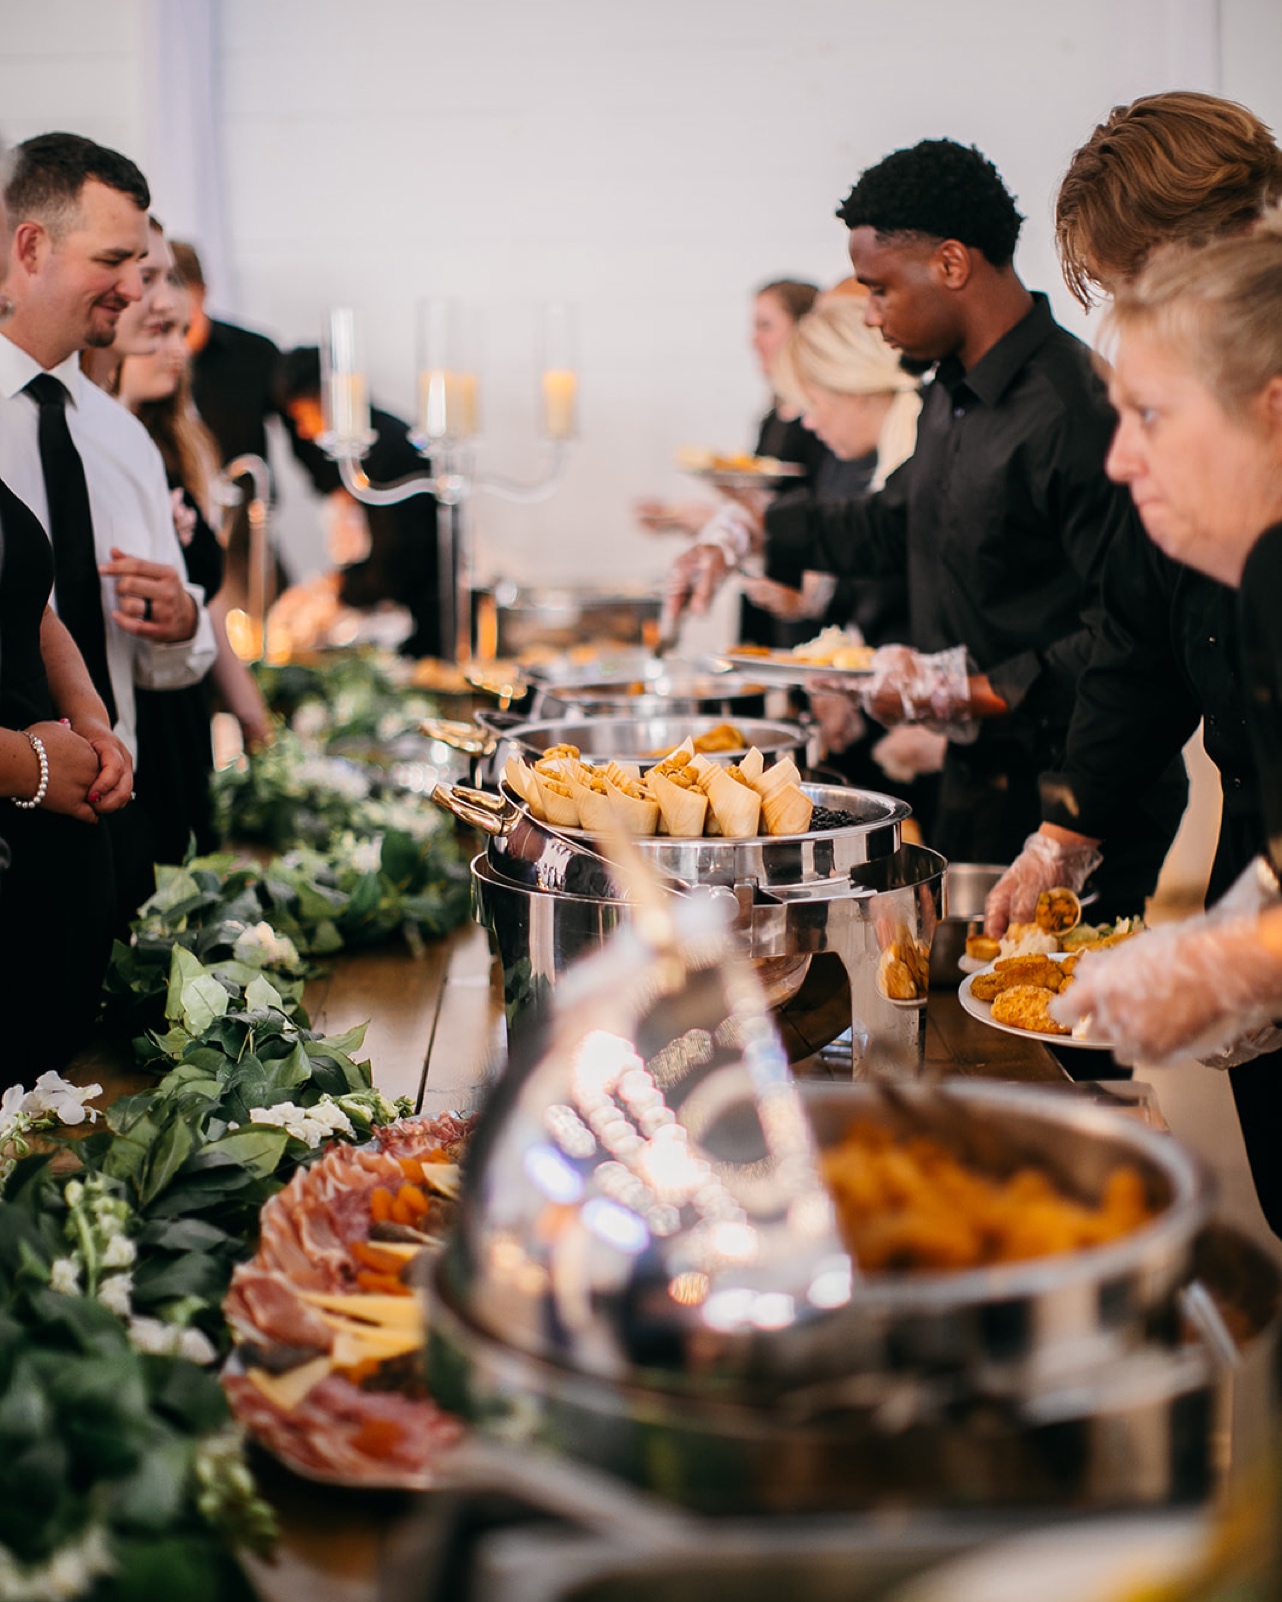 Guests fill their plates during the reception.